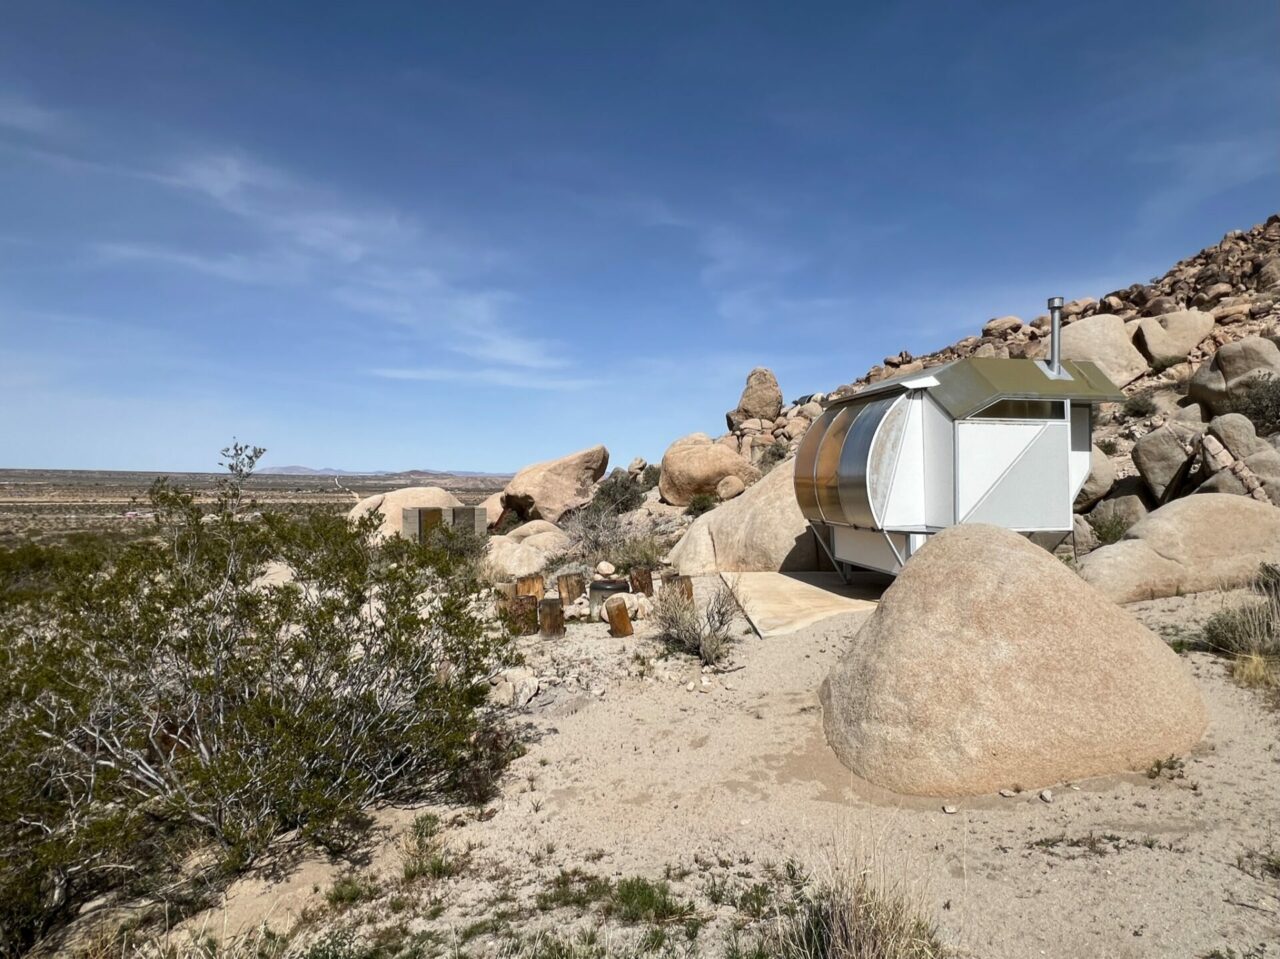 Pod where the artists in residence stay at in AZ West in Joshua Tree